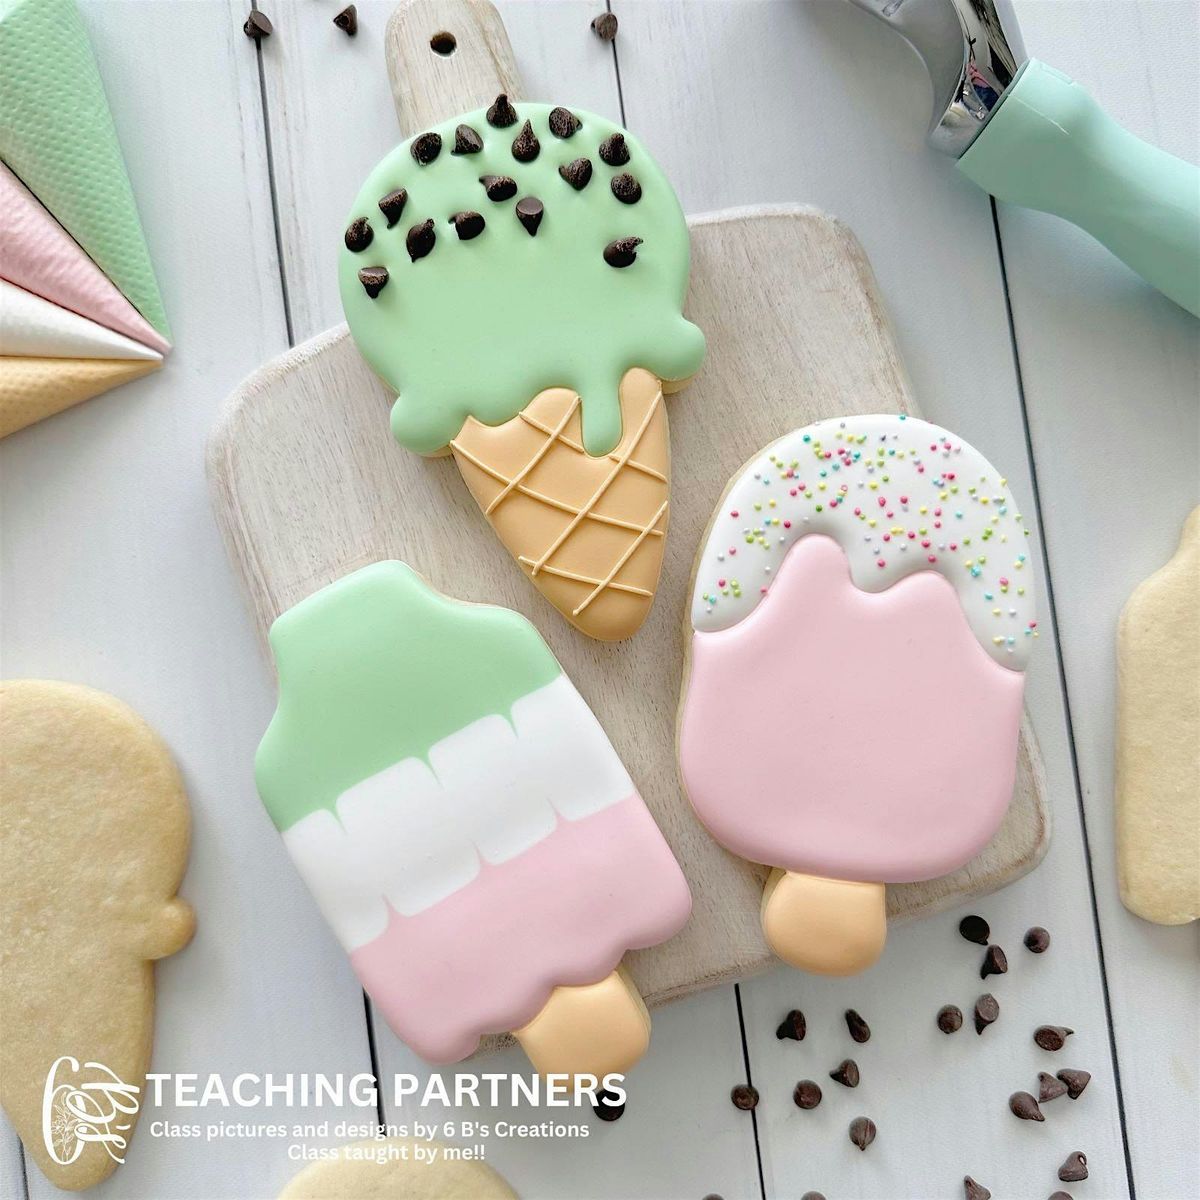 Sprinkles & Scoops Session Two: Kids Cookie Decorating Class